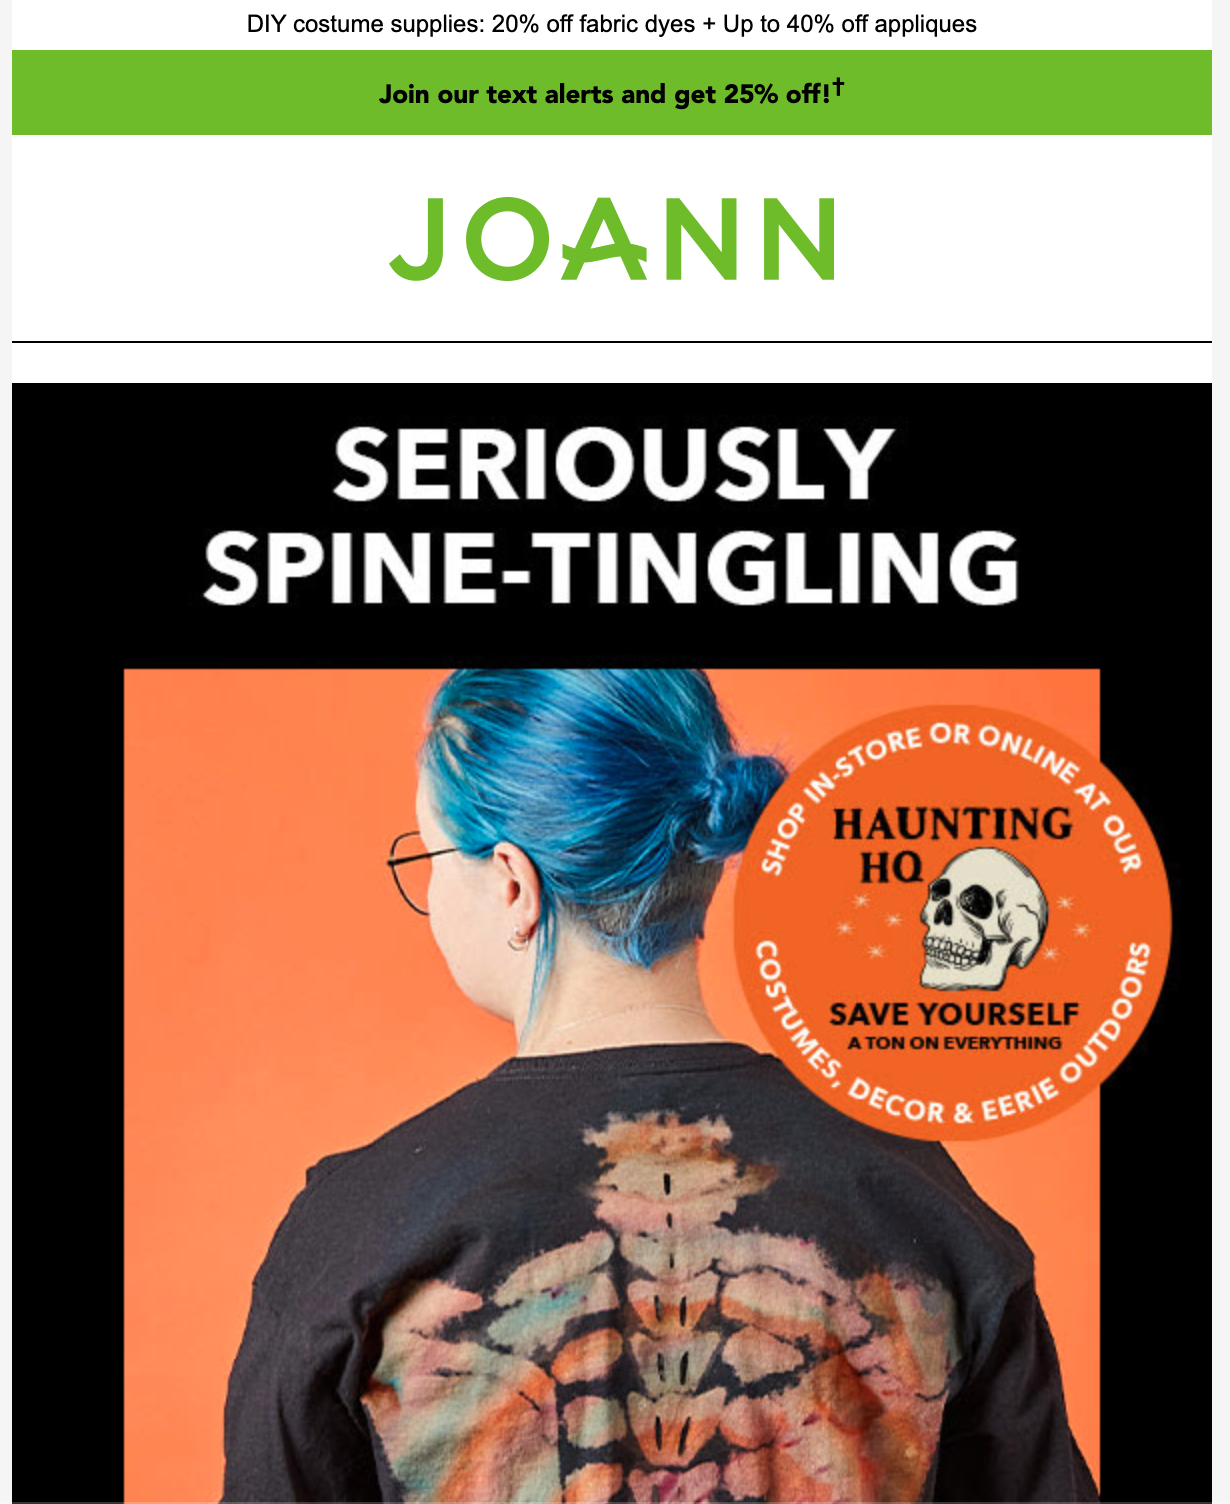 Joann Halloween email campaign